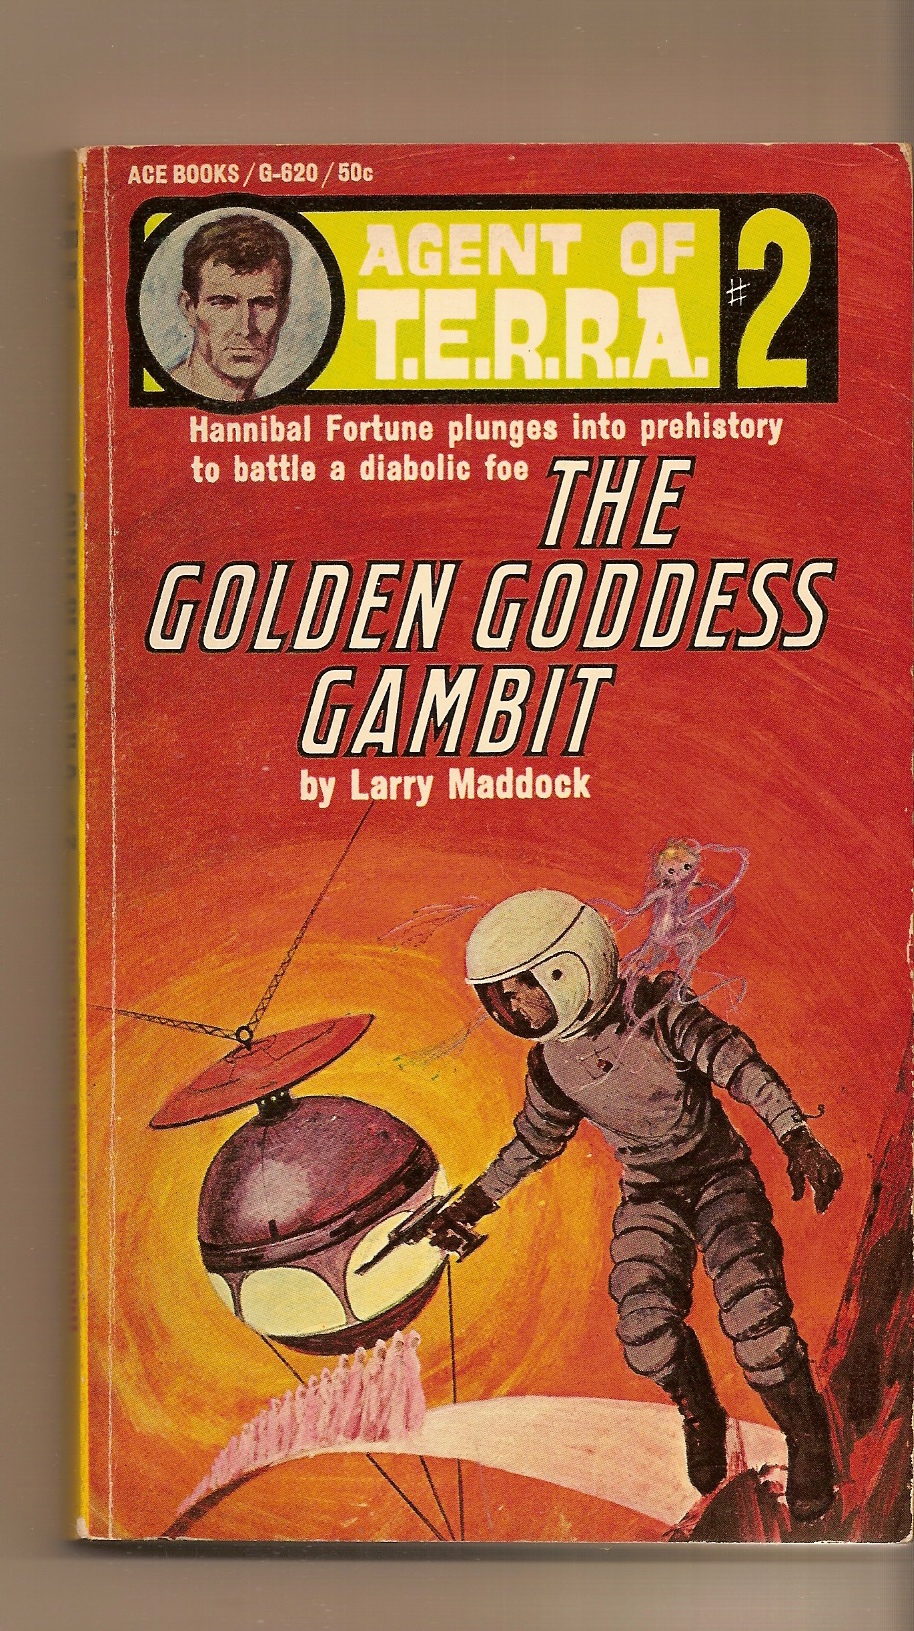 MADDOCK LARRY - Golden Godess Gambit, the Agent of T.E. R.R. A. #2